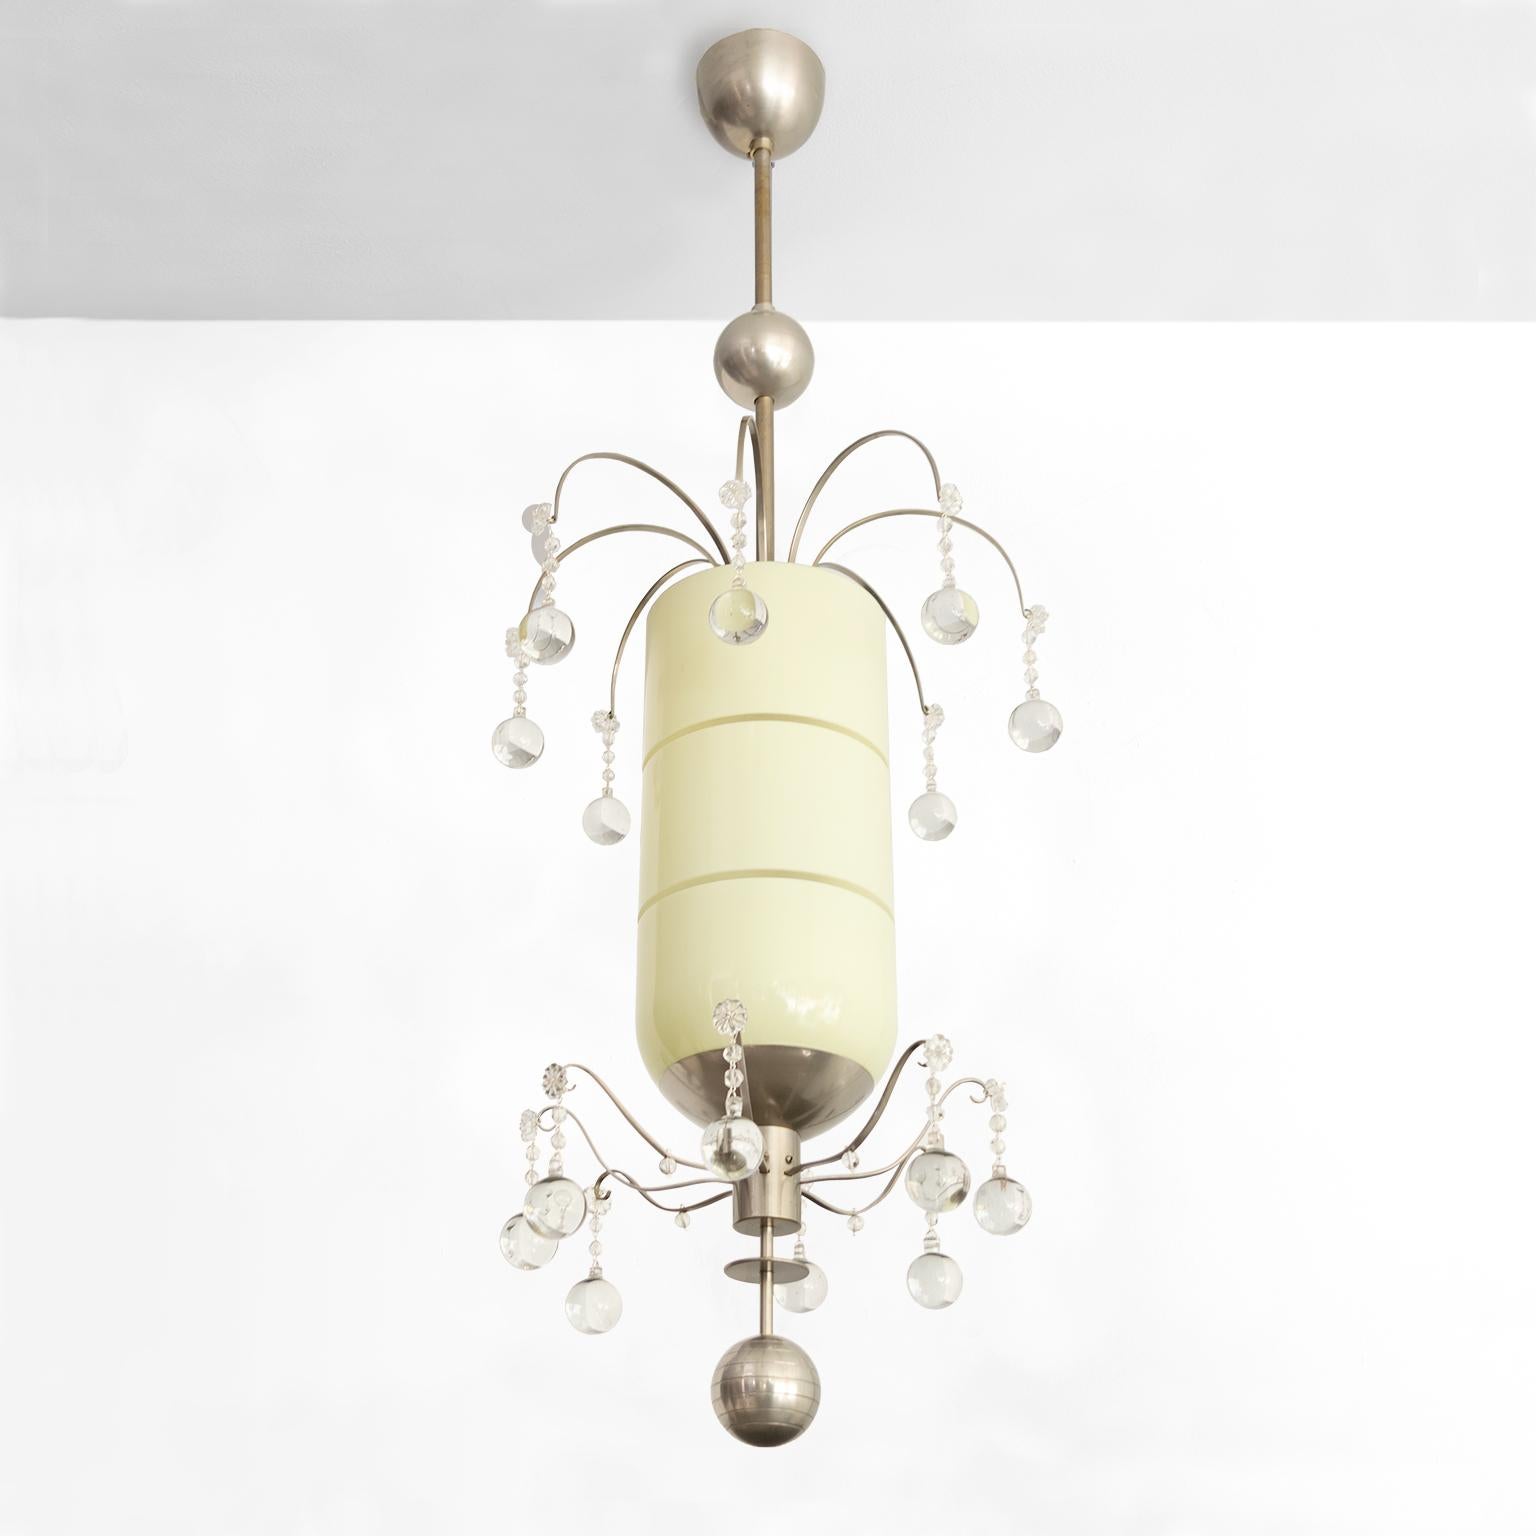 Swedish Art Deco pendant by Bohlmarks with 2 tiers of mixed size crystals surrounding a capsule shaped modernist cased glass shade with horizontal etched grooves. The brass metal structure is plated with nickel from canopy to finial. Newly restored,